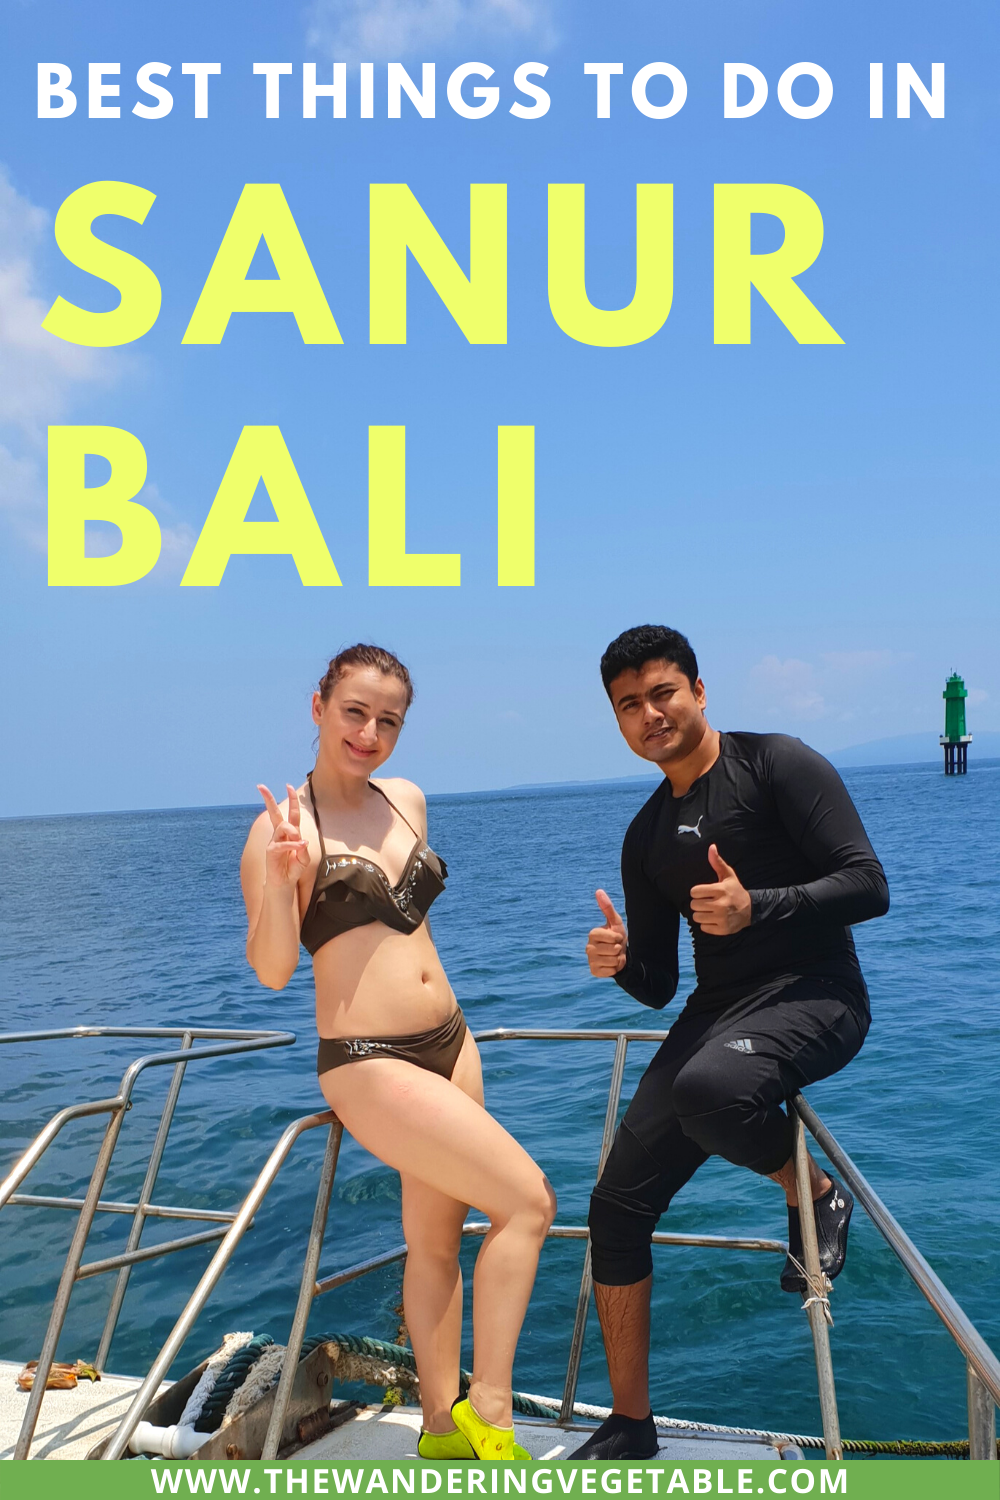 The best things to do in Sanur, Bali